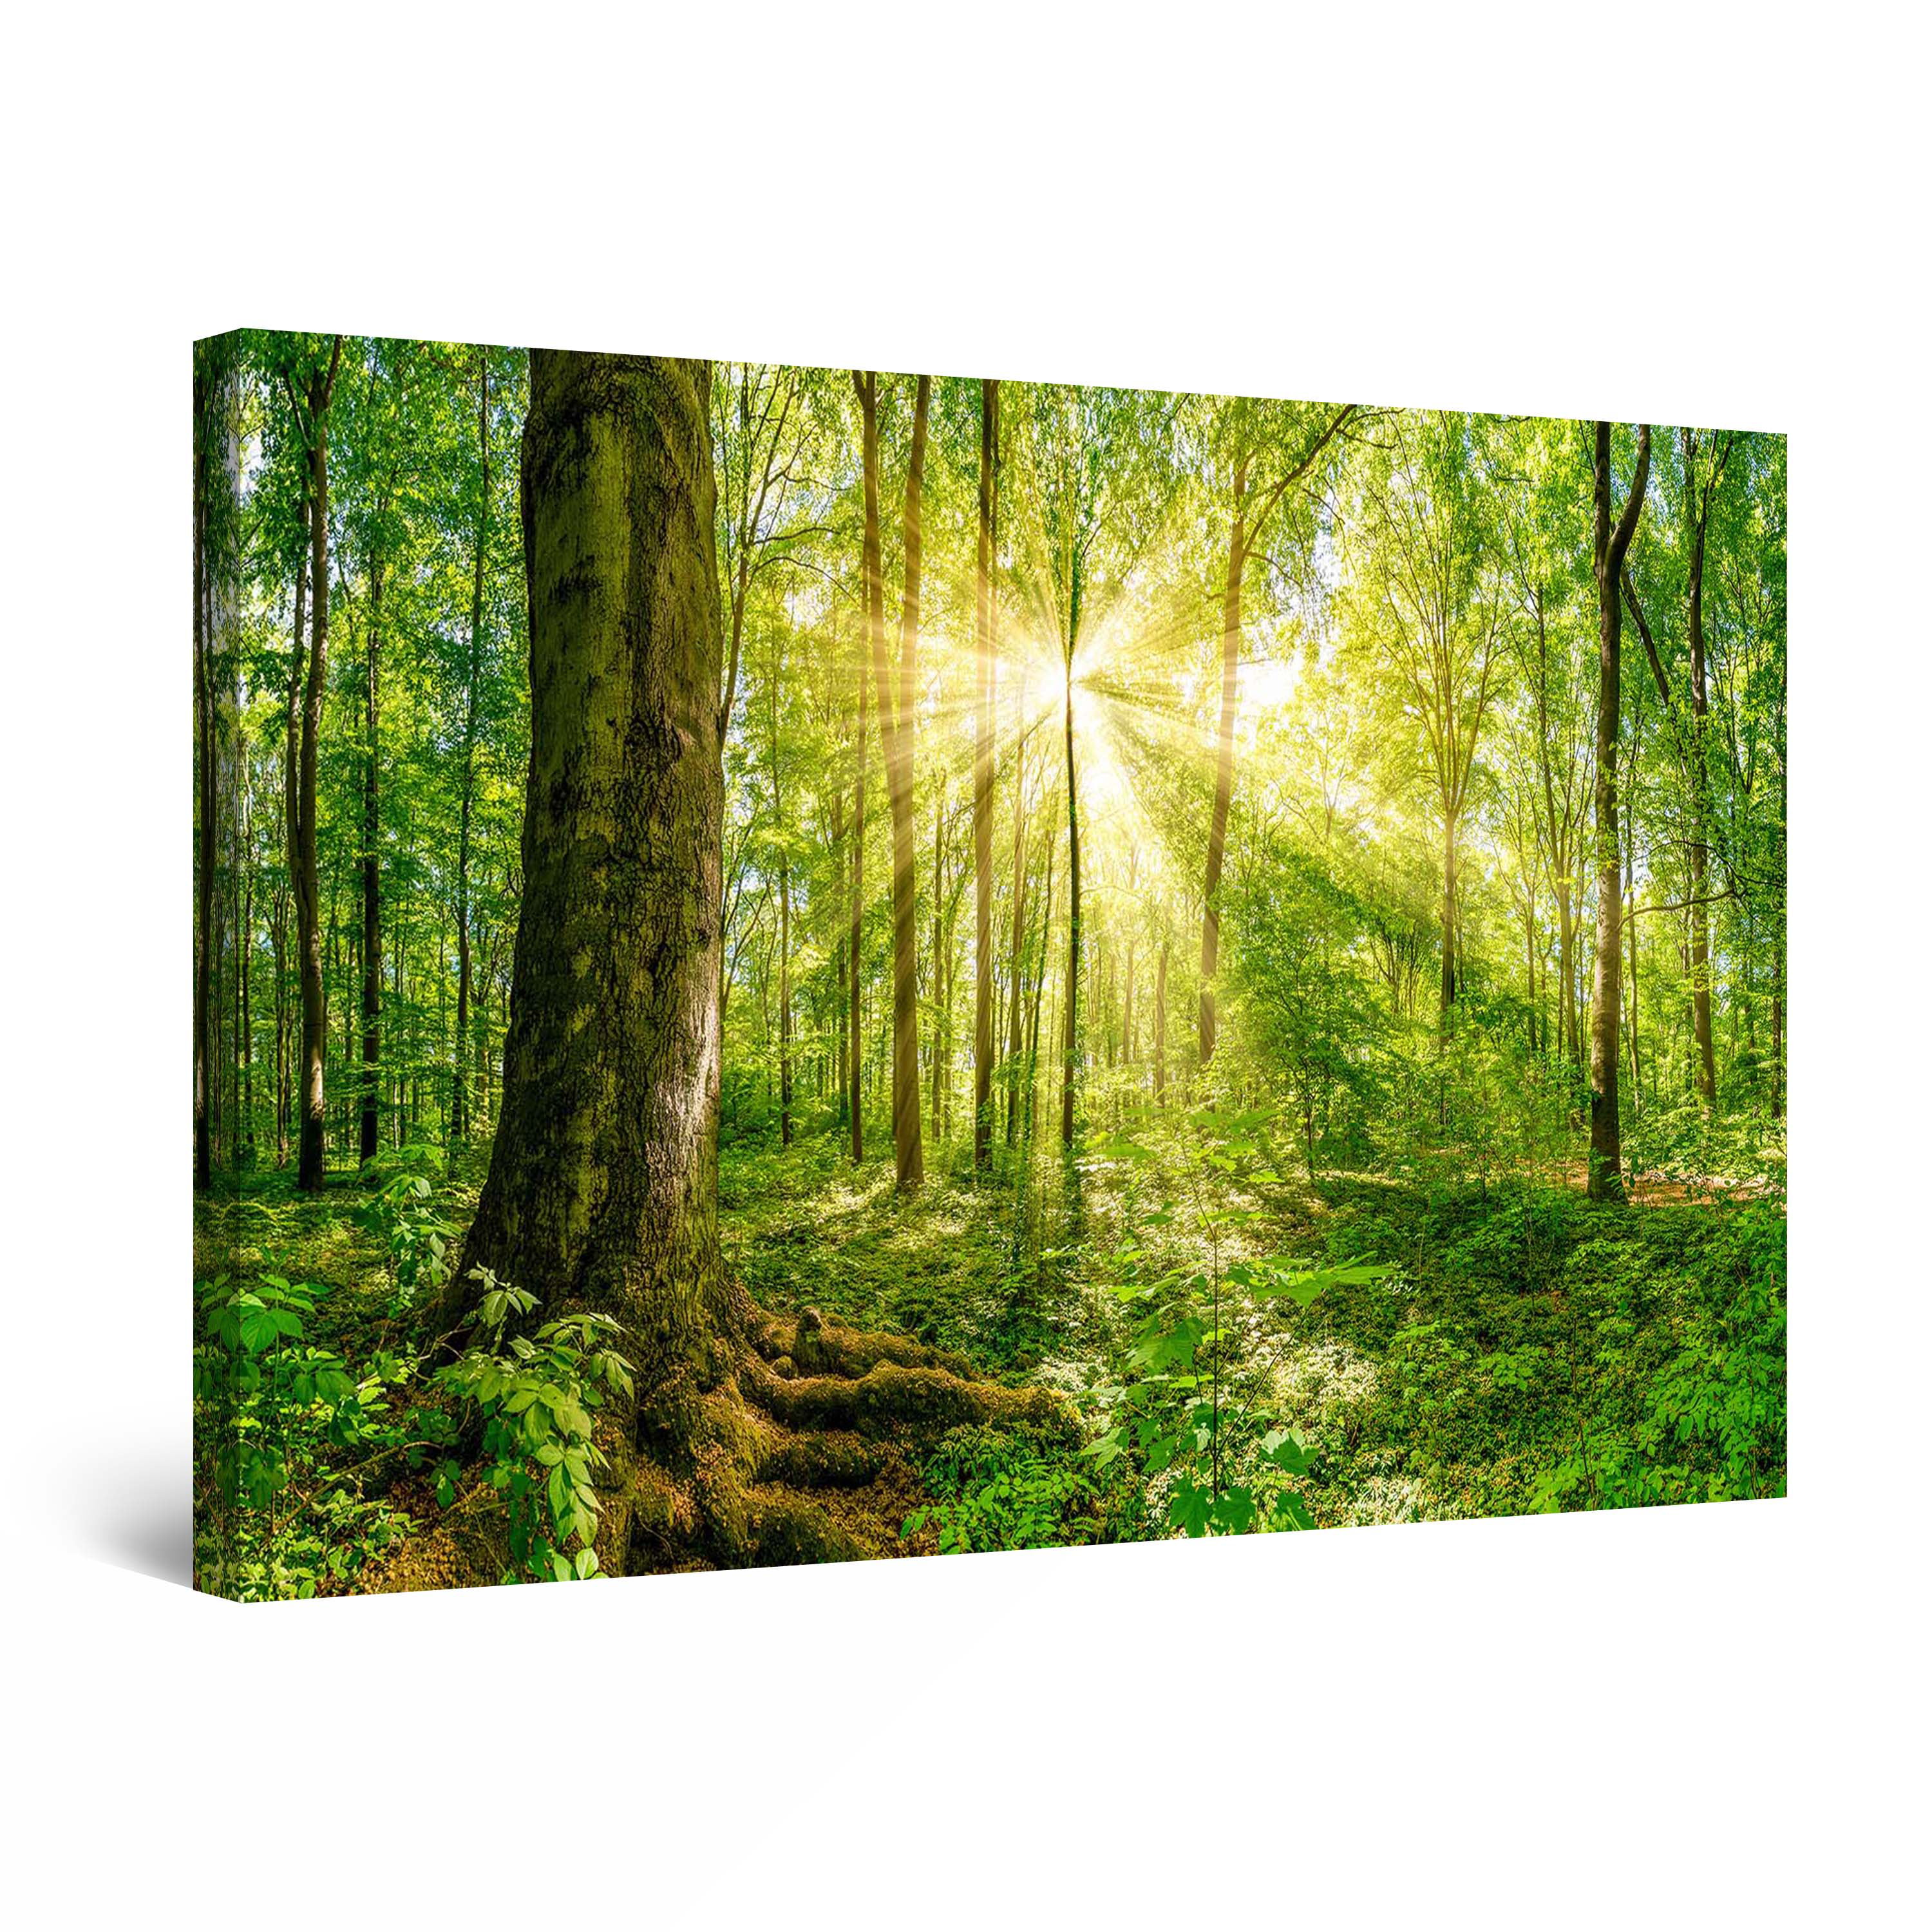 Startonight Canvas Wall Art Abstract - Psychedelic Landscape in Romania ...